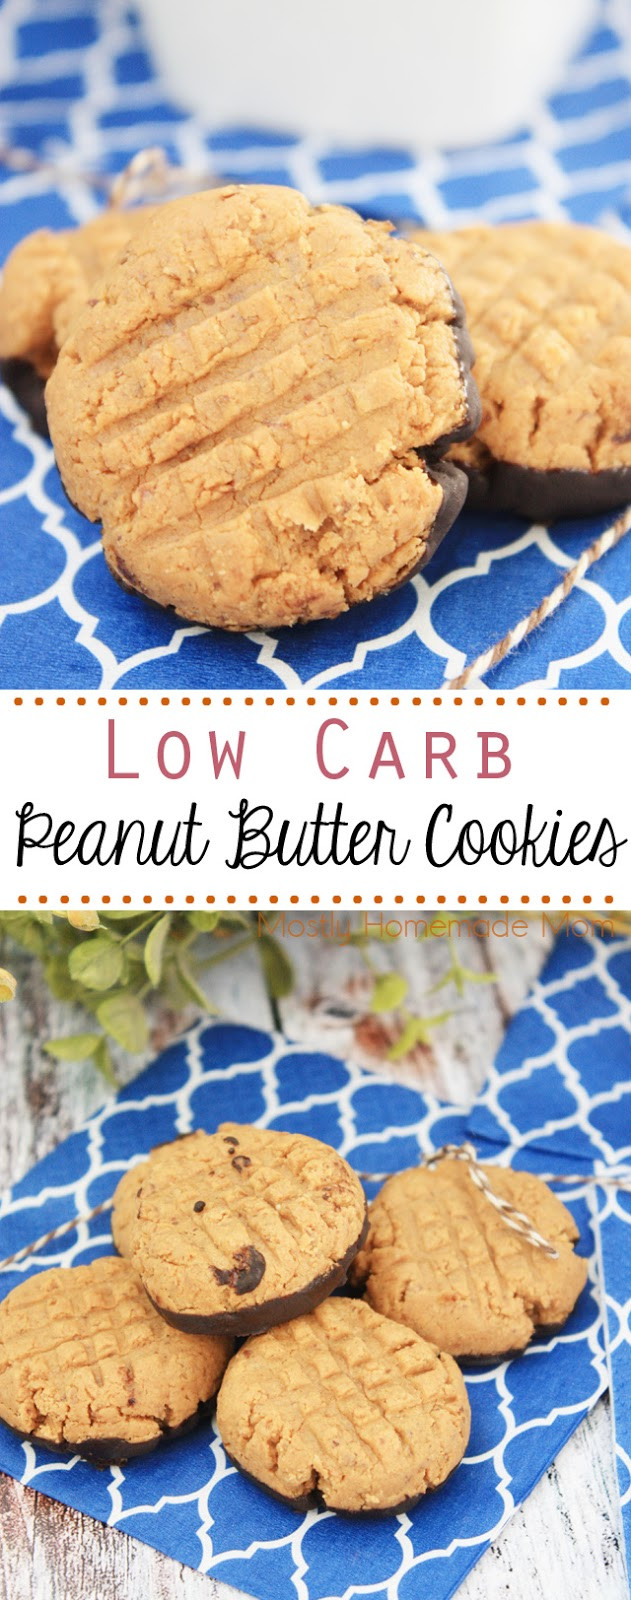 Low Carb Butter Cookies
 Low Carb Peanut Butter Cookies